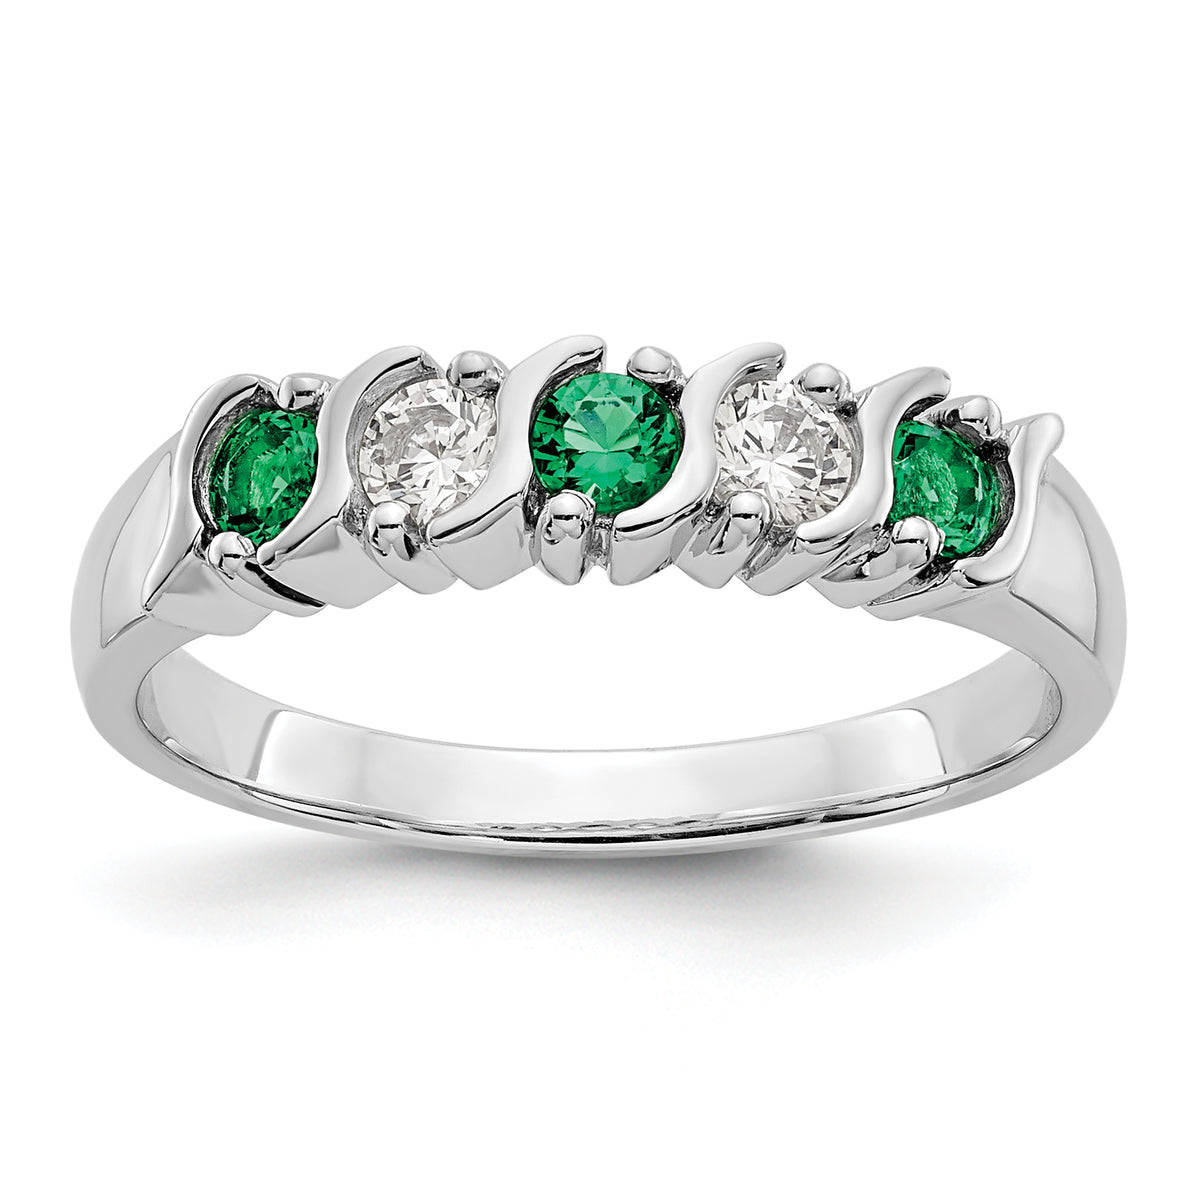 14K White Gold 1/5 carat Diamond and Emerald Complete Band